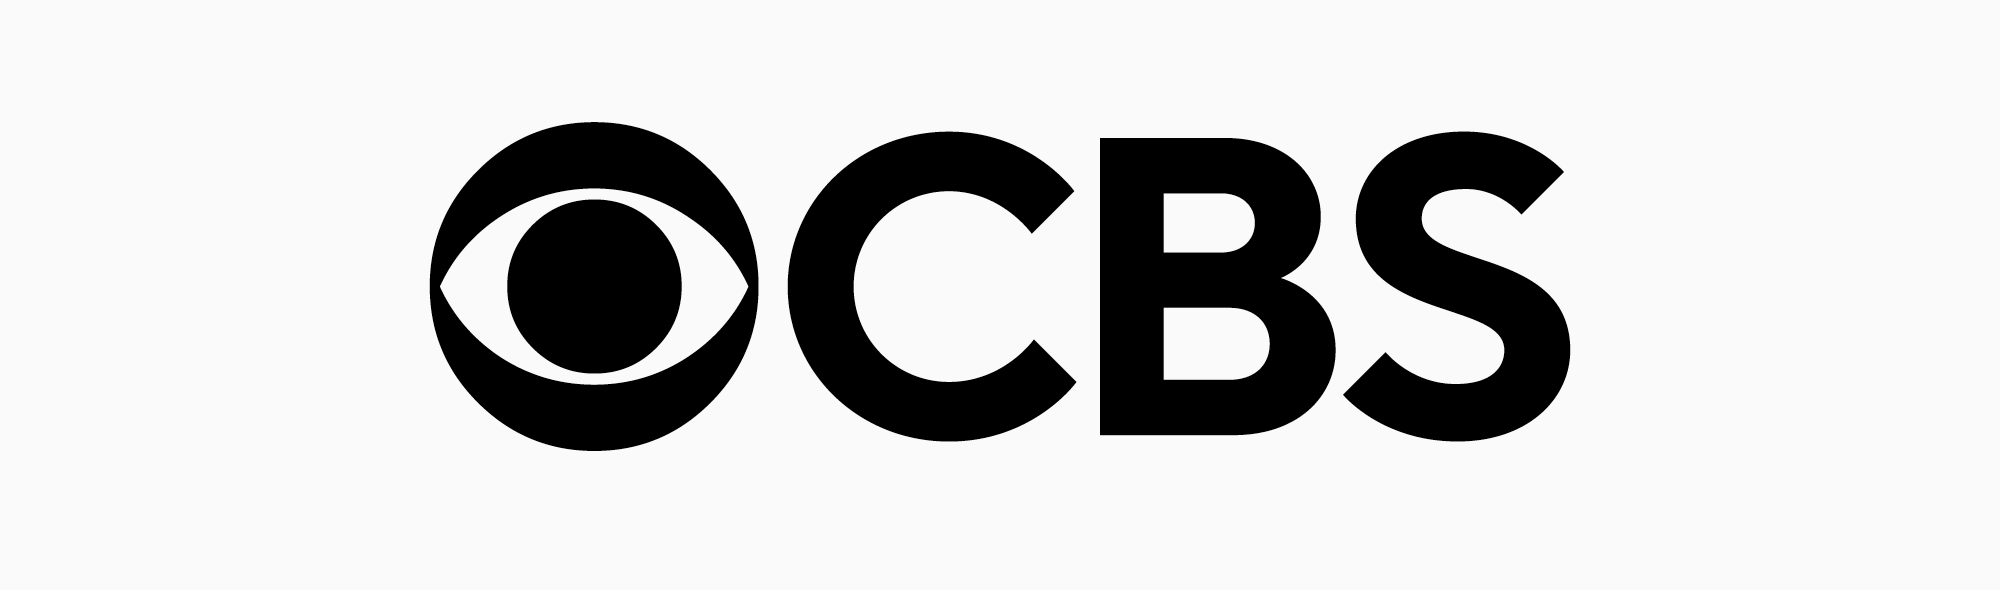 CBS News streaming video channel logo has TT Norms® Pro